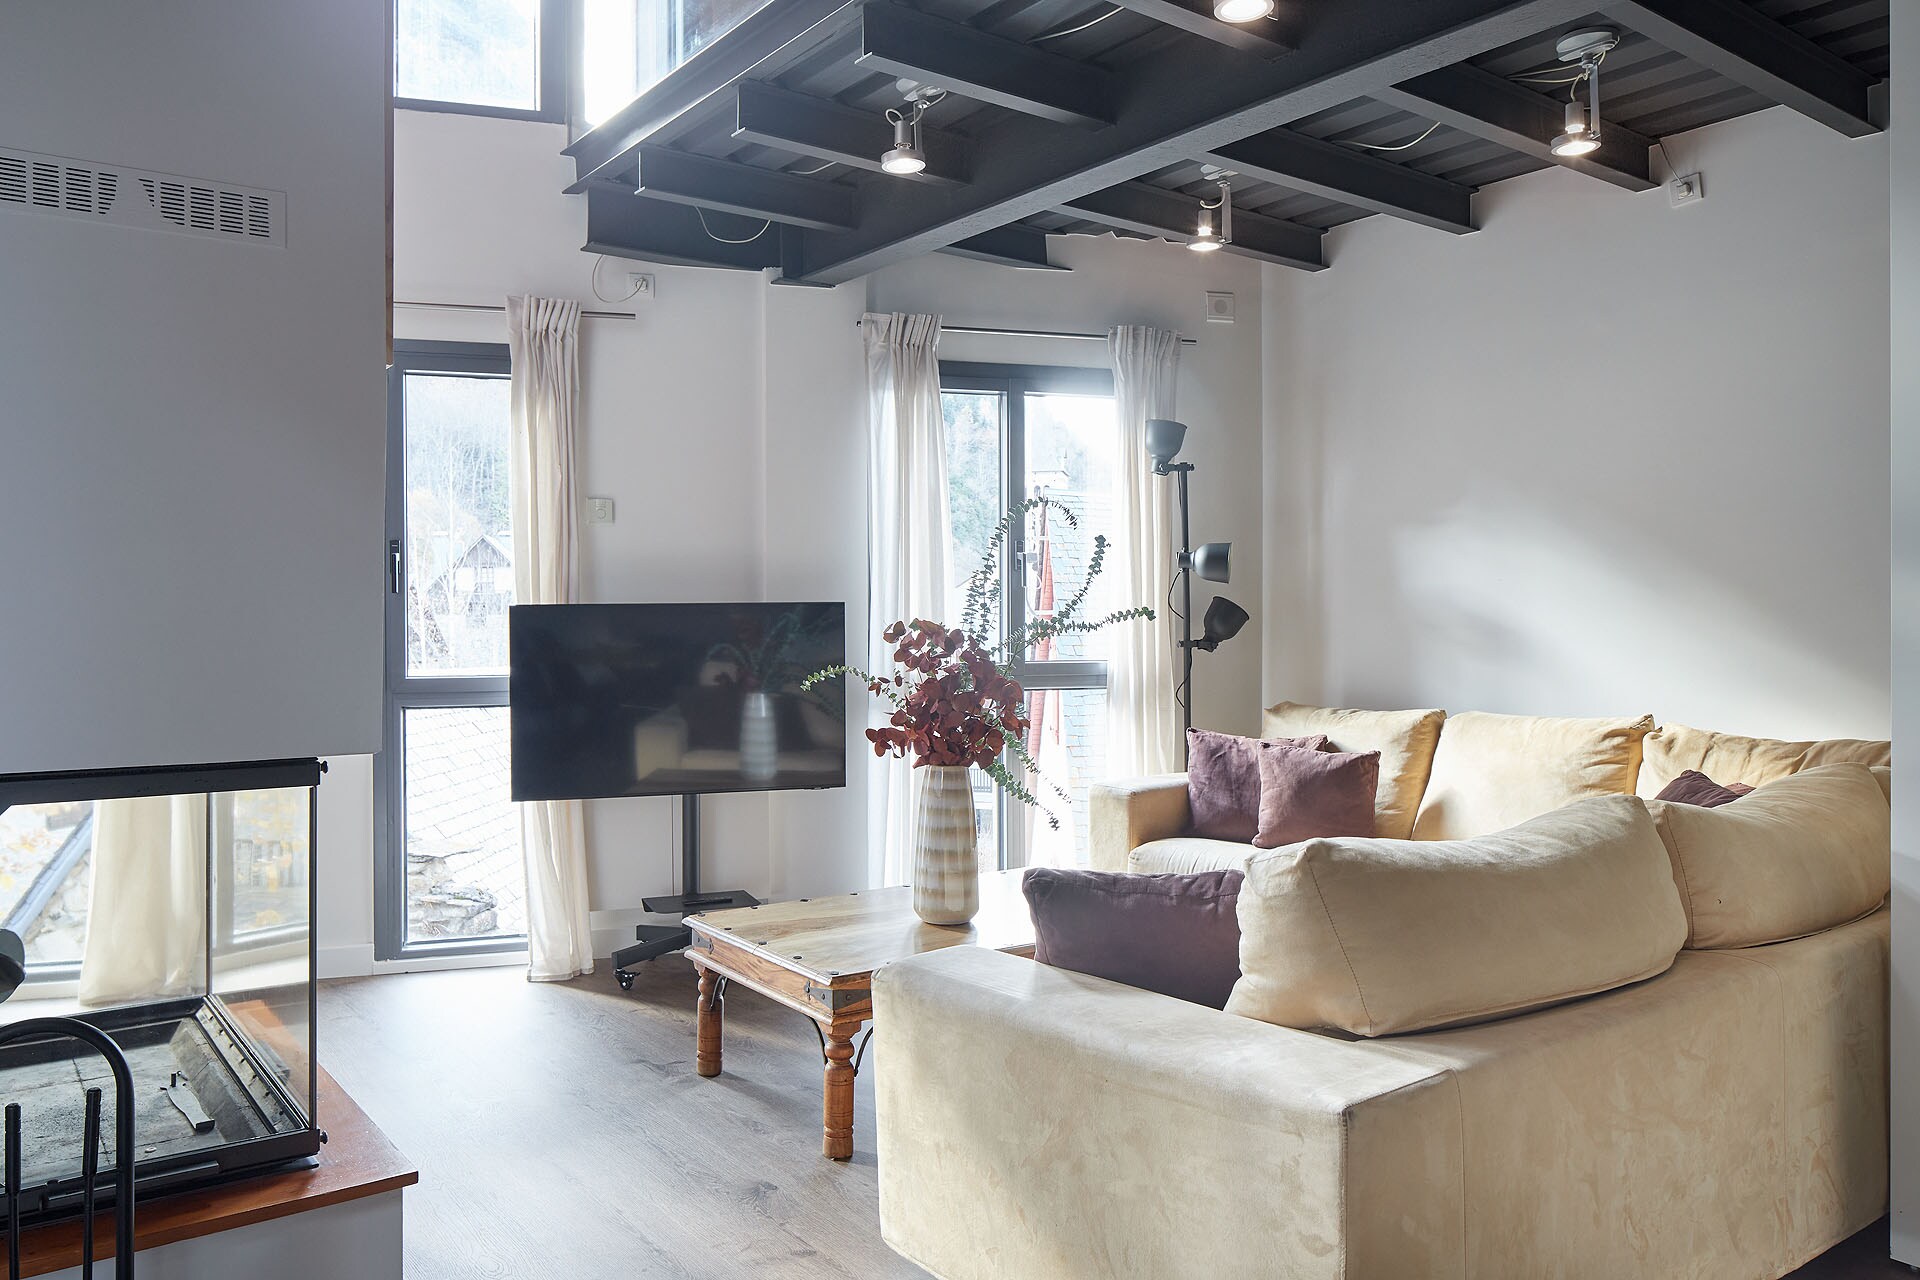 Property Image 1 - Charming Apartment with High Ceiling next to Shops